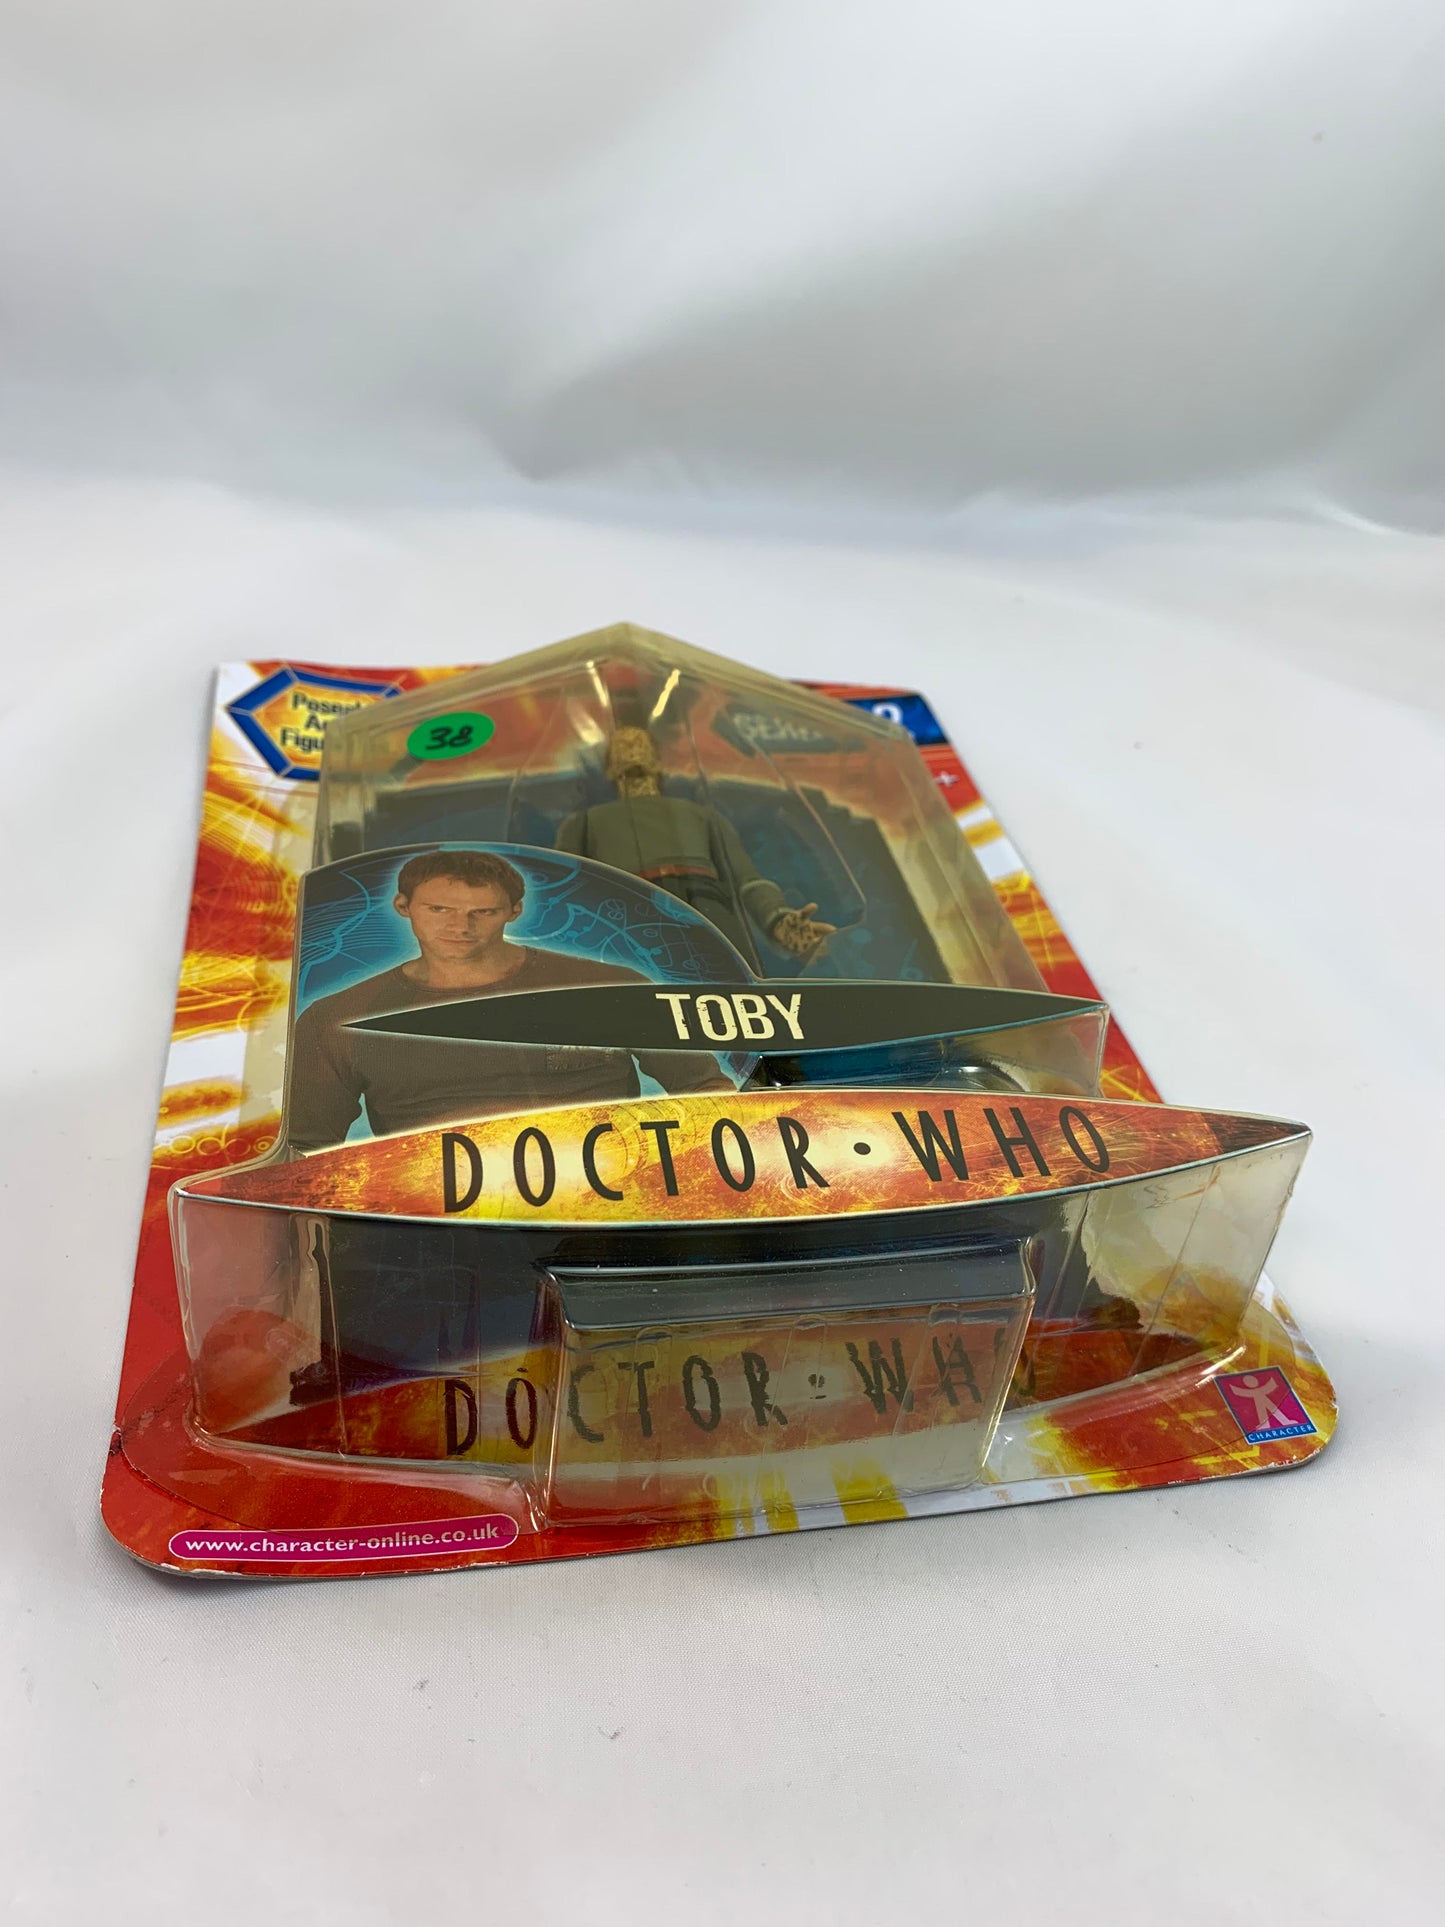 Character Options MOC BBC Dr Who Doctor Who Series 2 Toby 2004 - MOC